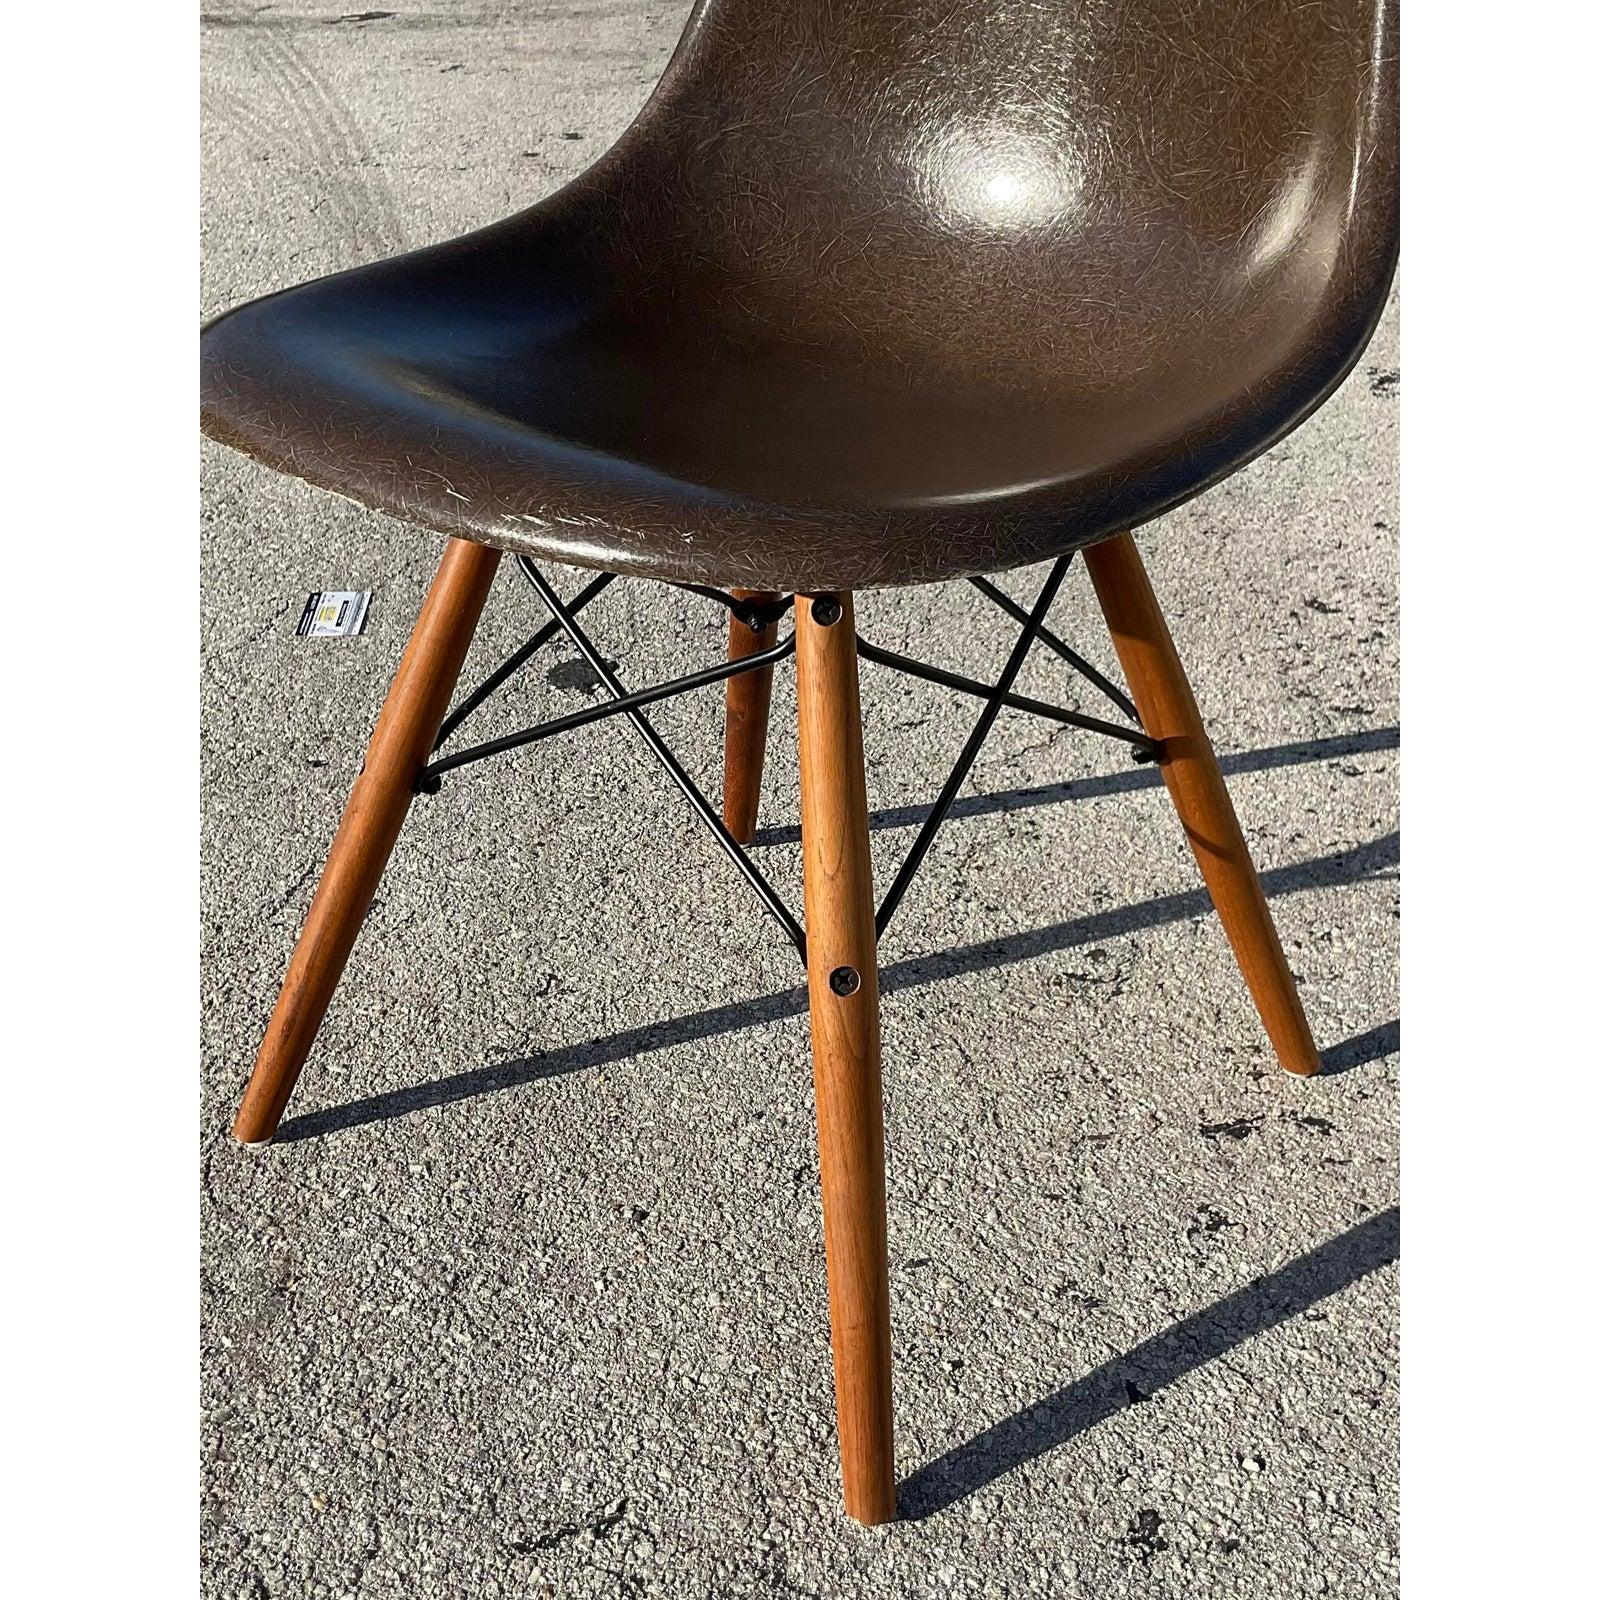 Stunning set of 8 vintage MCM dining chairs. Made by the iconic Herman Miller and tagged on the bottom. The coveted DFSW Shell design with a molded fiberglass seat and the wooden dowel Eiffel Tower pedestal base. These chairs also come with some